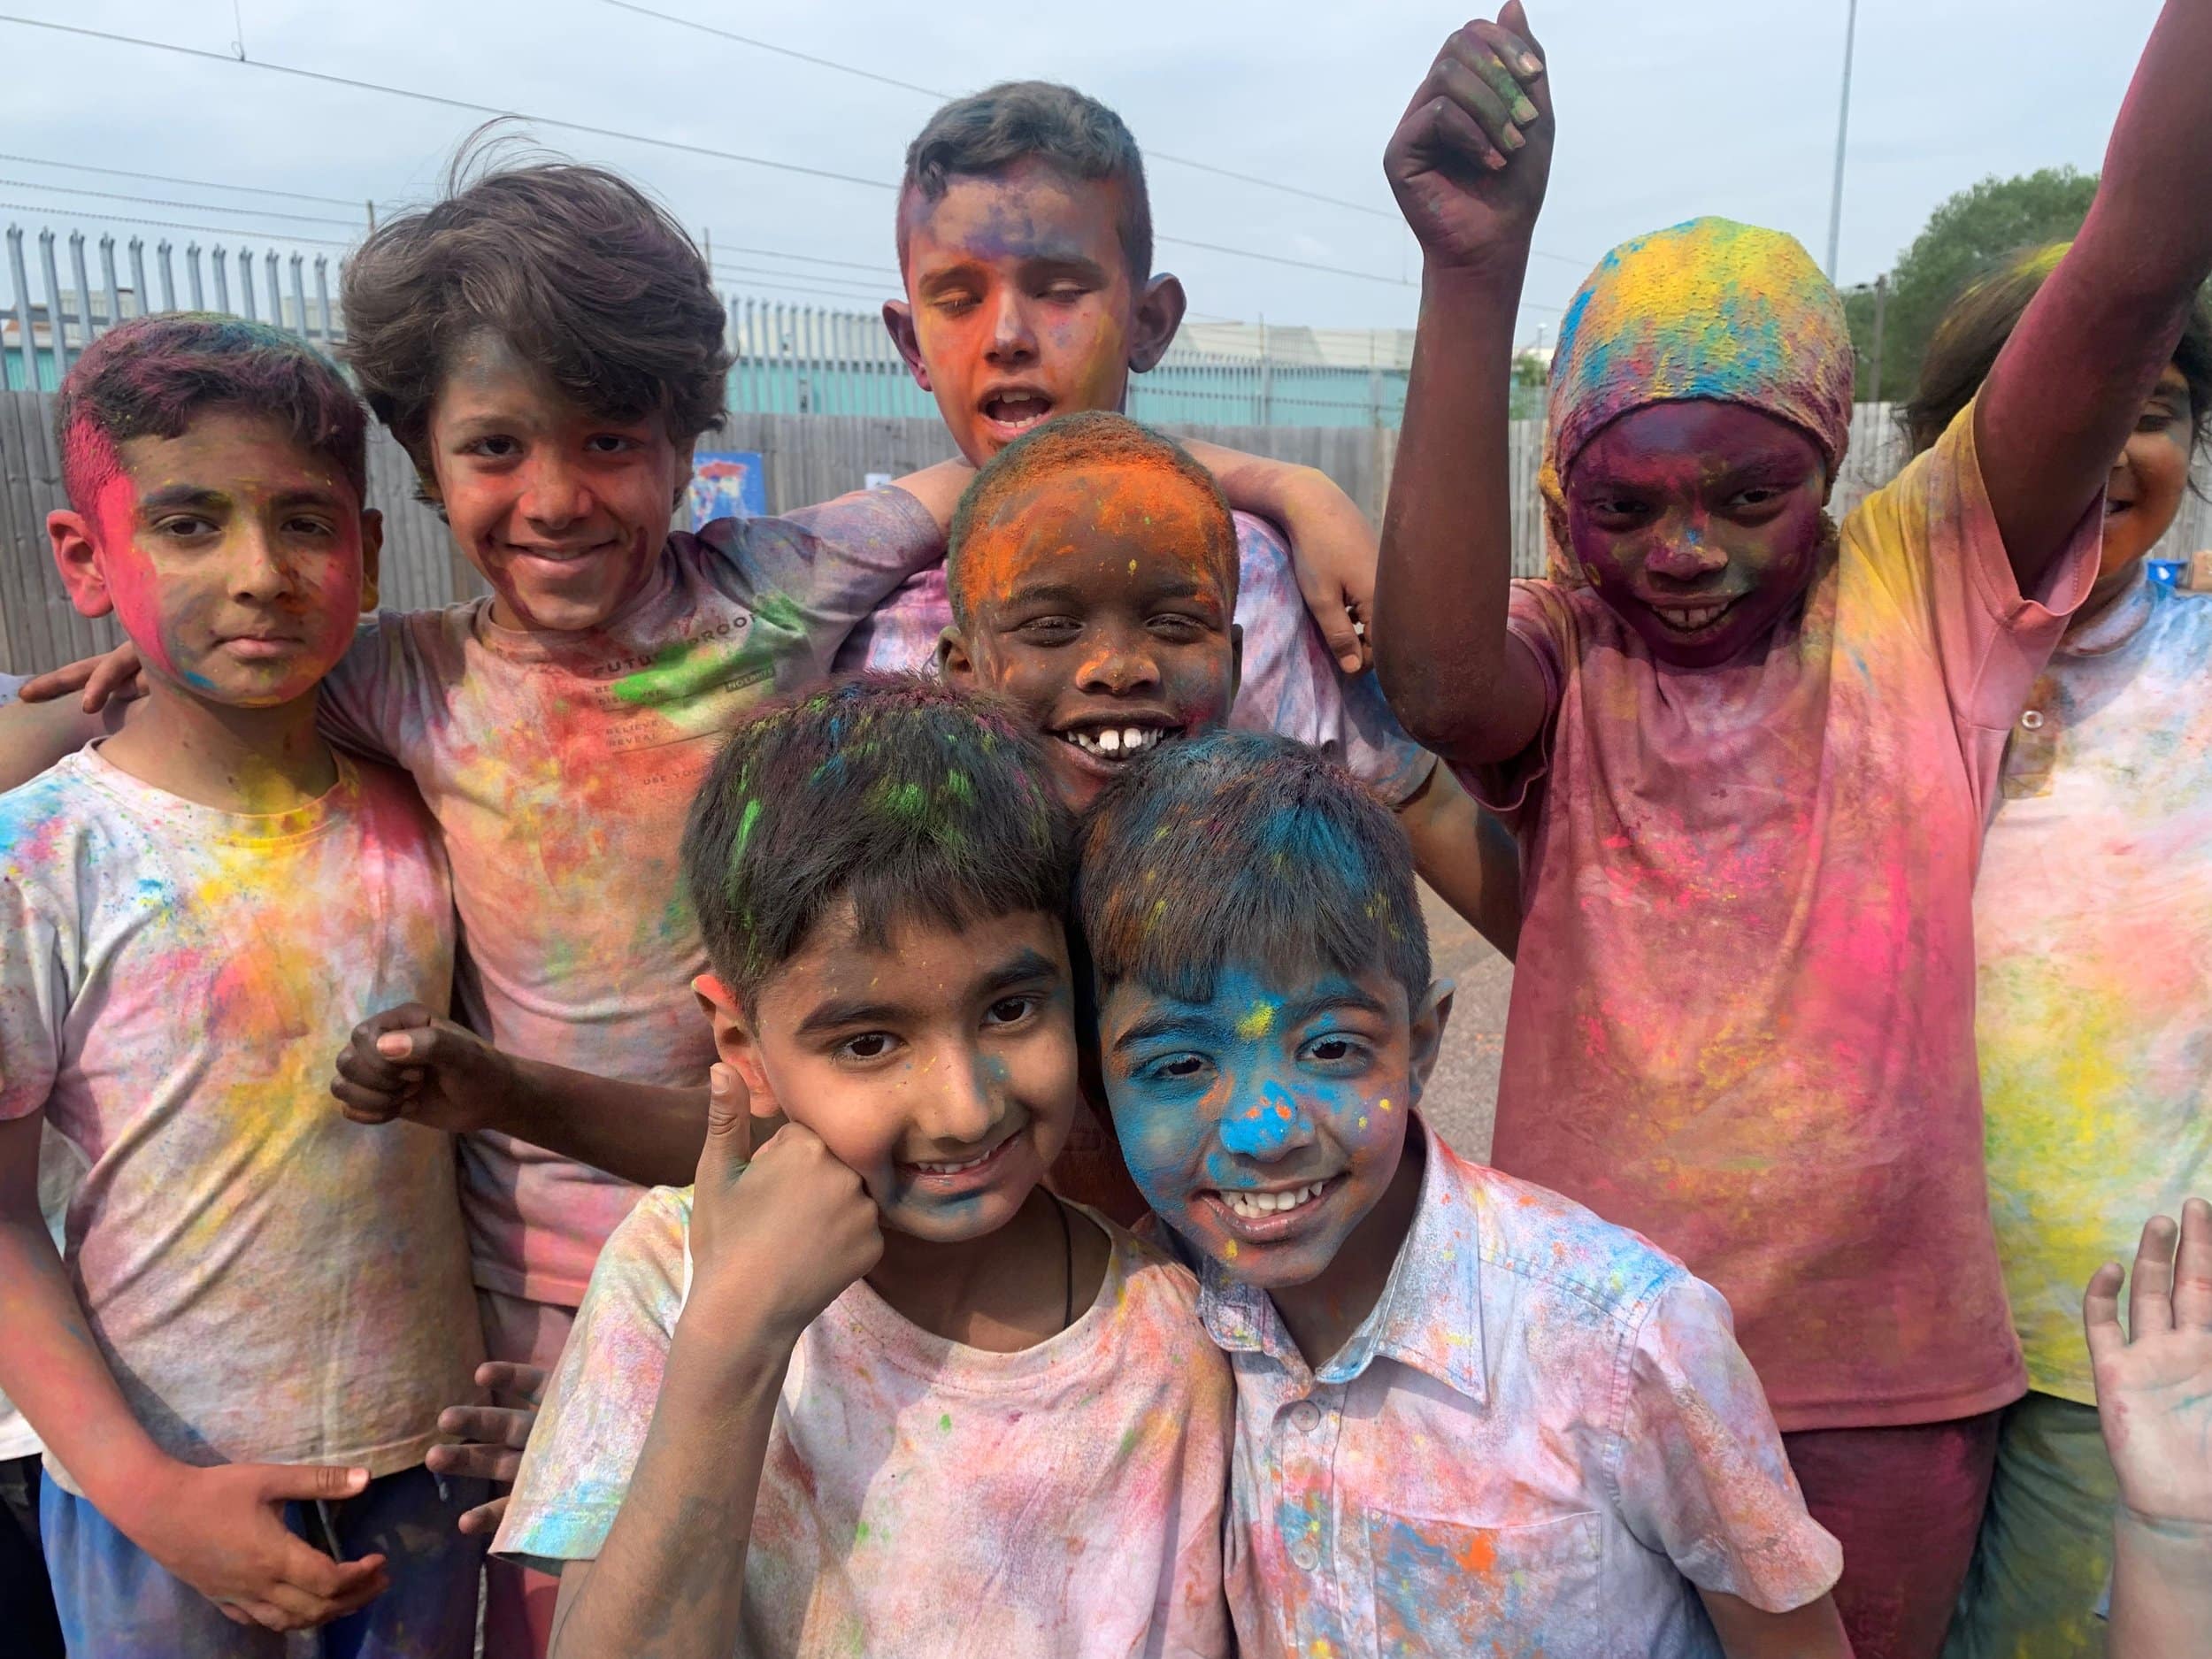 Pupils from Zaytouna Primary School in Derby took part in a Colour Run, thanks to Progressive Sports